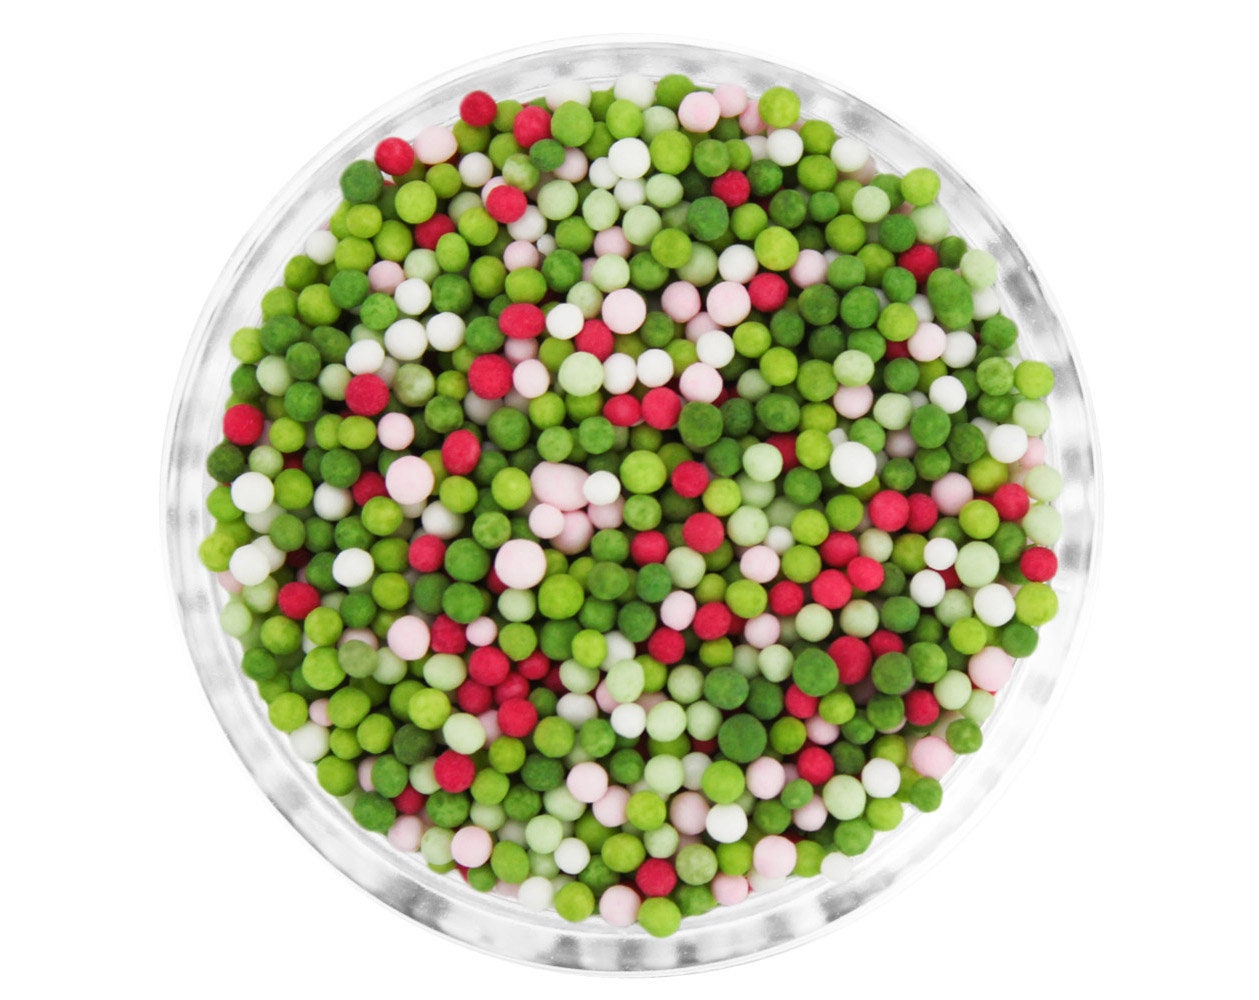 Holly Berry Non-Pareils Blend - Our Holly Berry Blend Is A Mix Of Non-Pareils in Cherry Red, White, Shades Green, & Pink